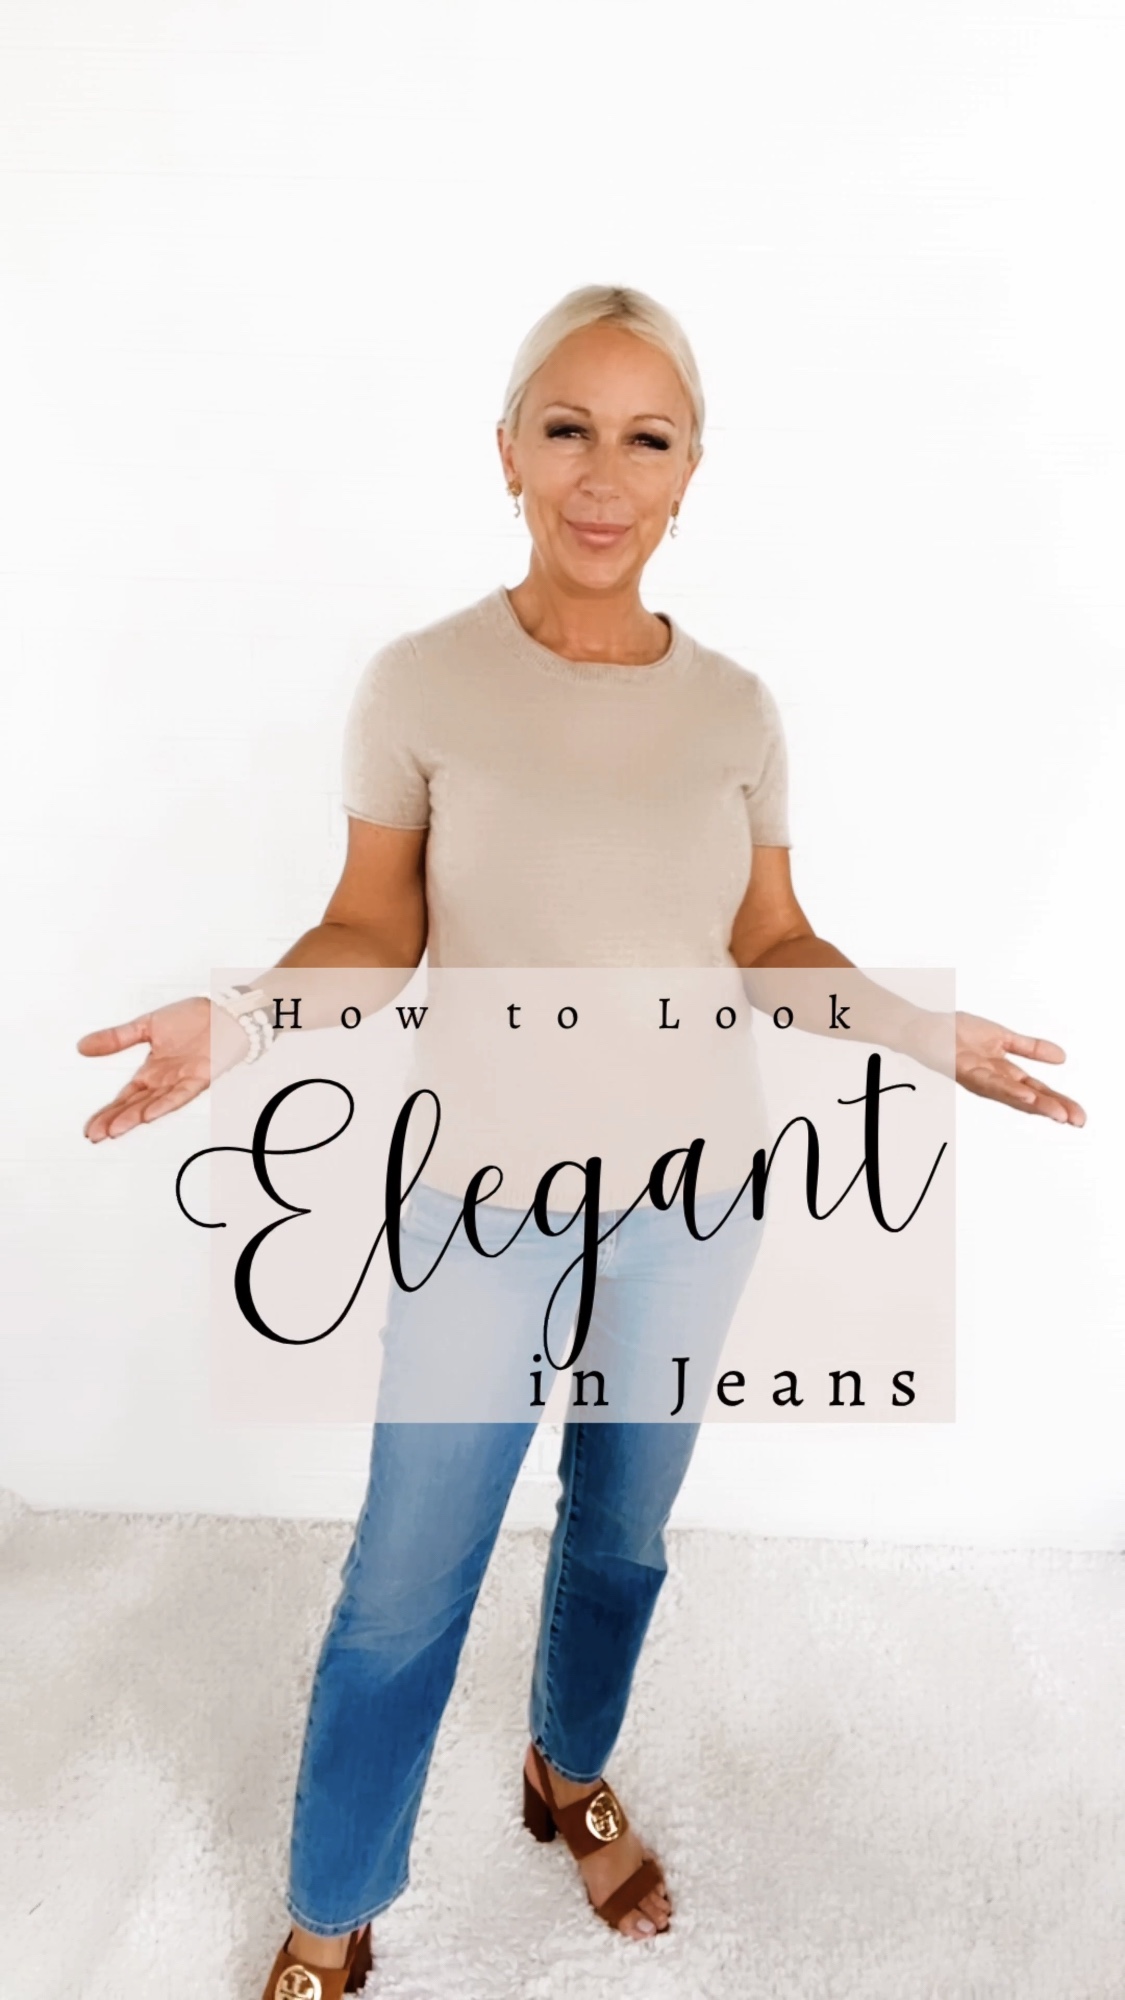 How to Look Elegant in Jeans